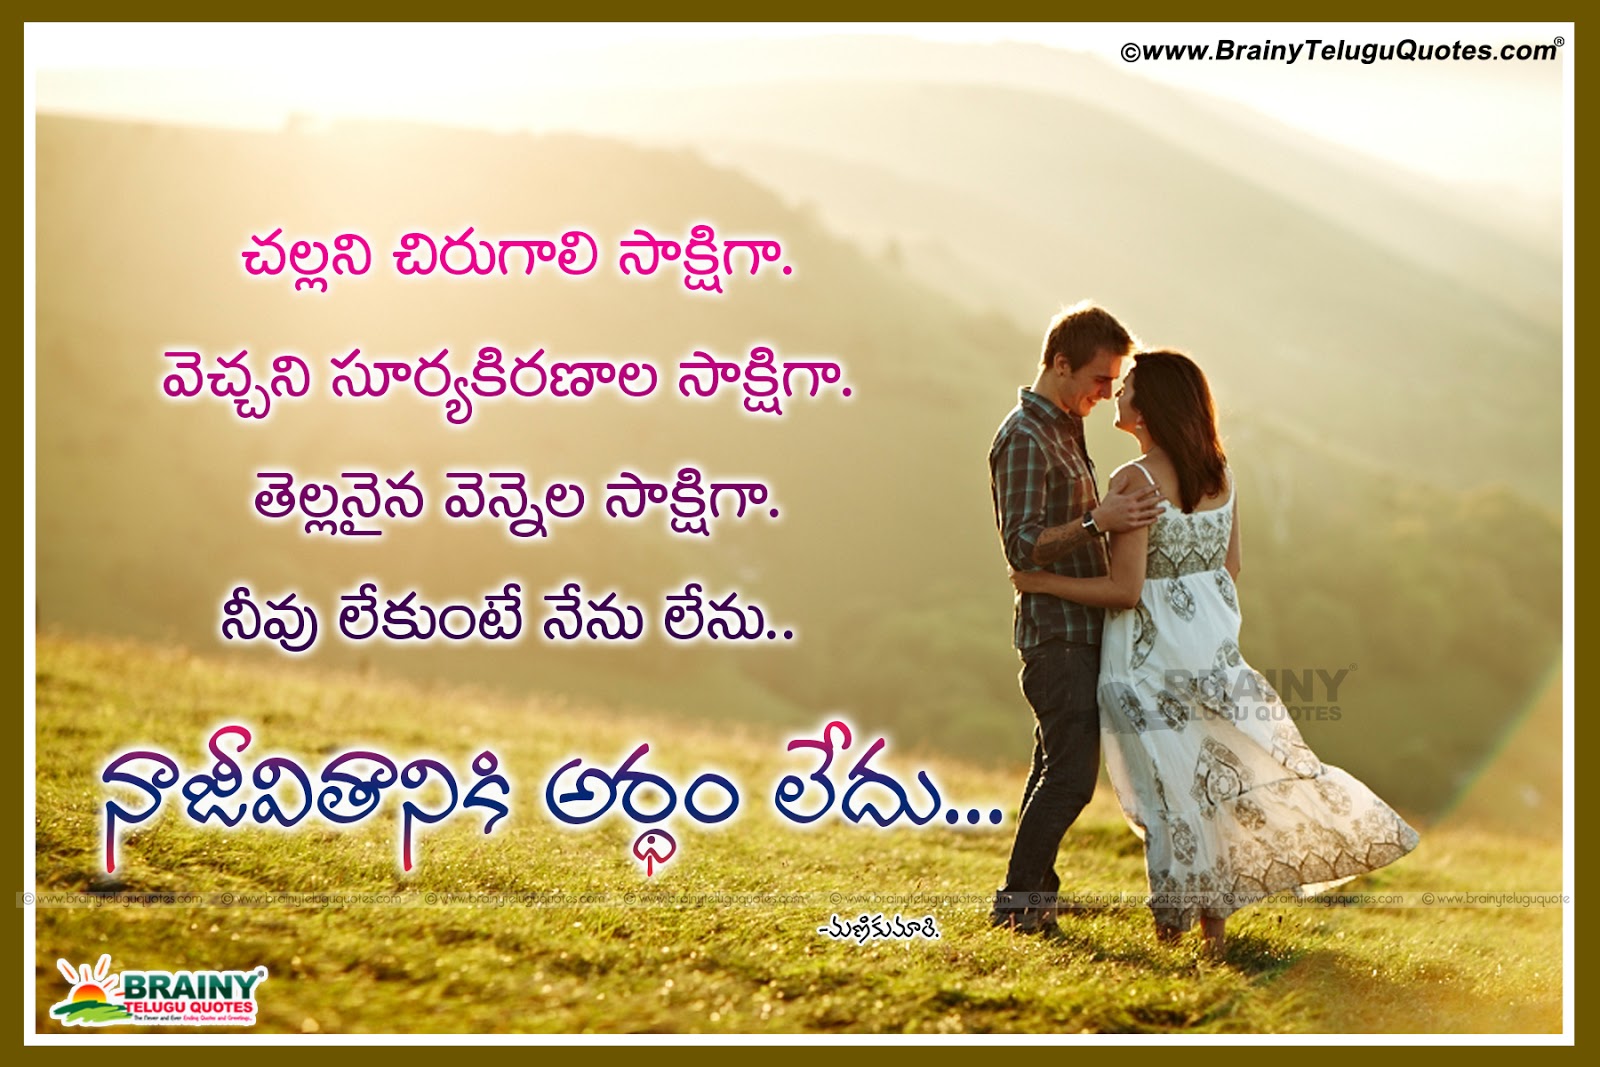 Cute Couple Quotes Wallpapers Wallpapers